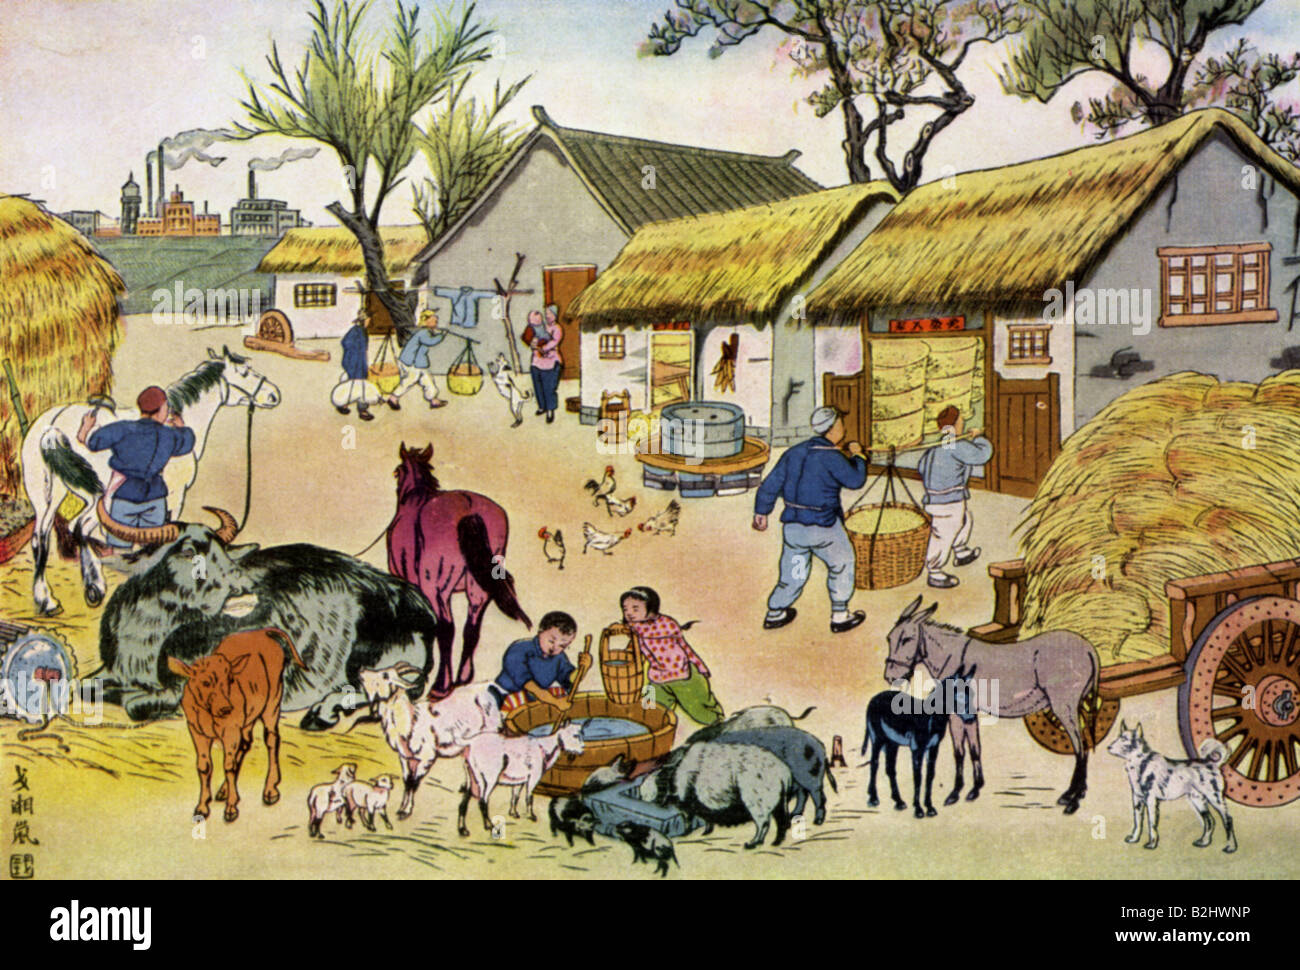 geography / travel, China, agriculture, Chinese new year`s picture: On the farm, 20th century, animals, farmer, drawing, donkey, cow, horse, pigs, pig, goats, goat, goatling, yard dog, houses, factory in the background, historic, historical, people, Stock Photo